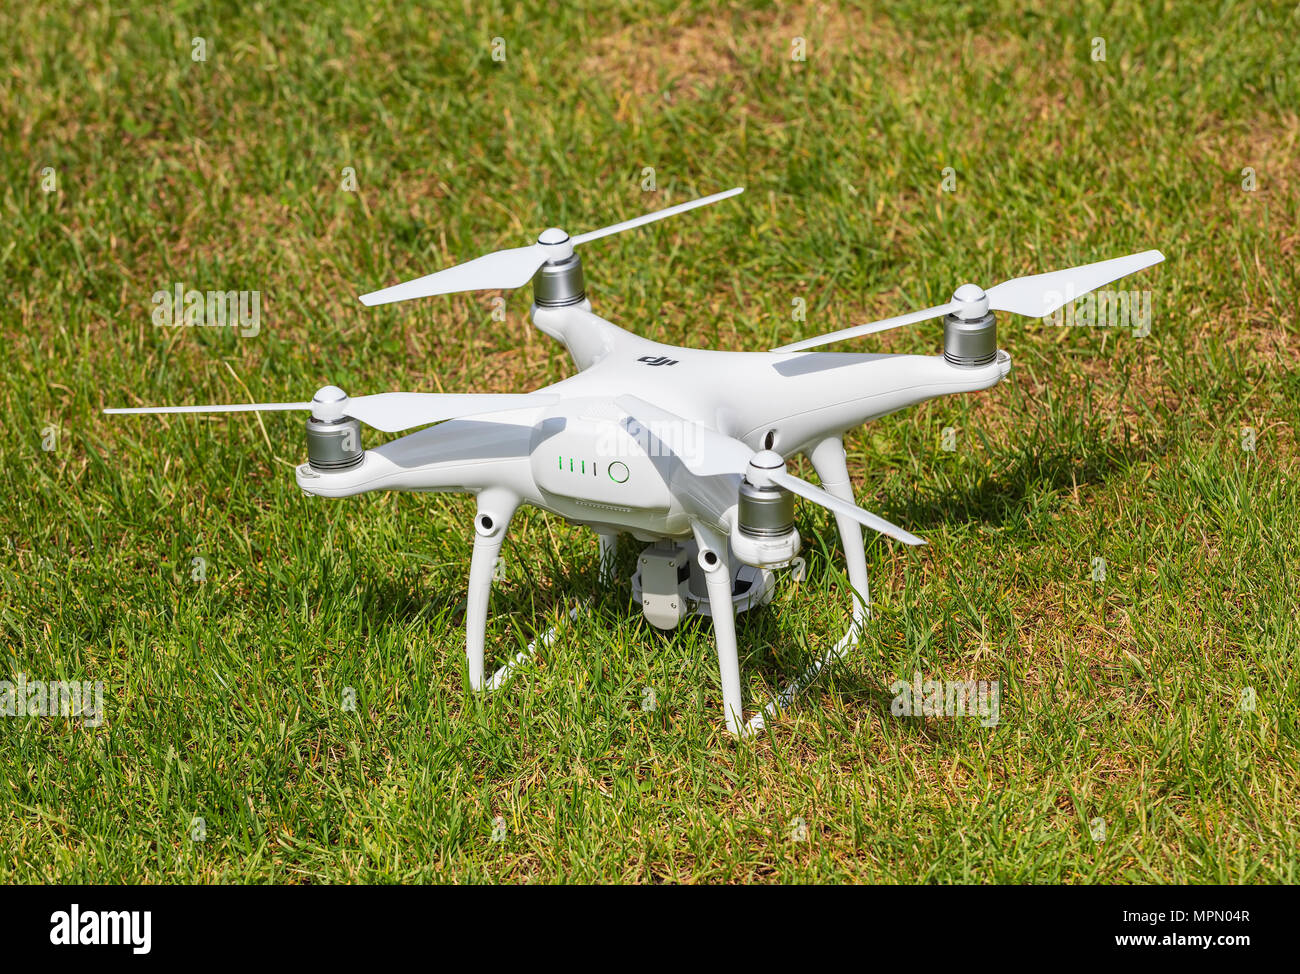 A DJI Phantom 4 Pro drone standing on green grass, rear view, focus on the  drone Stock Photo - Alamy